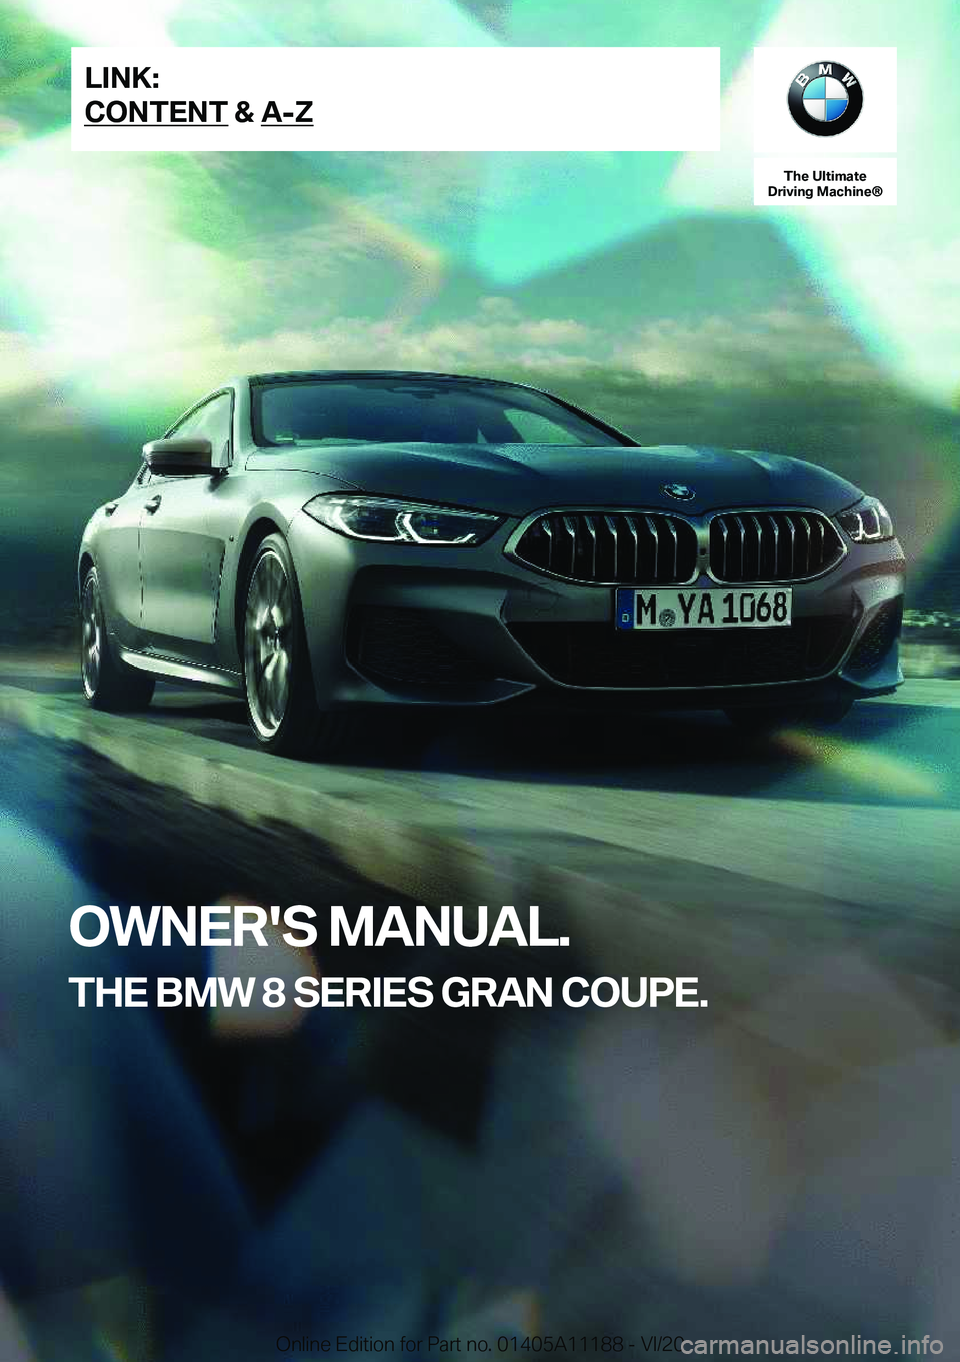 BMW 8 SERIES GRAN COUPE 2021  Owners Manual �T�h�e��U�l�t�i�m�a�t�e
�D�r�i�v�i�n�g��M�a�c�h�i�n�e�n
�O�W�N�E�R�'�S��M�A�N�U�A�L�.
�T�H�E��B�M�W��8��S�E�R�I�E�S��G�R�A�N��C�O�U�P�E�.�L�I�N�K�:
�C�O�N�T�E�N�T��&��A�-�Z�O�n�l�i�n�e�